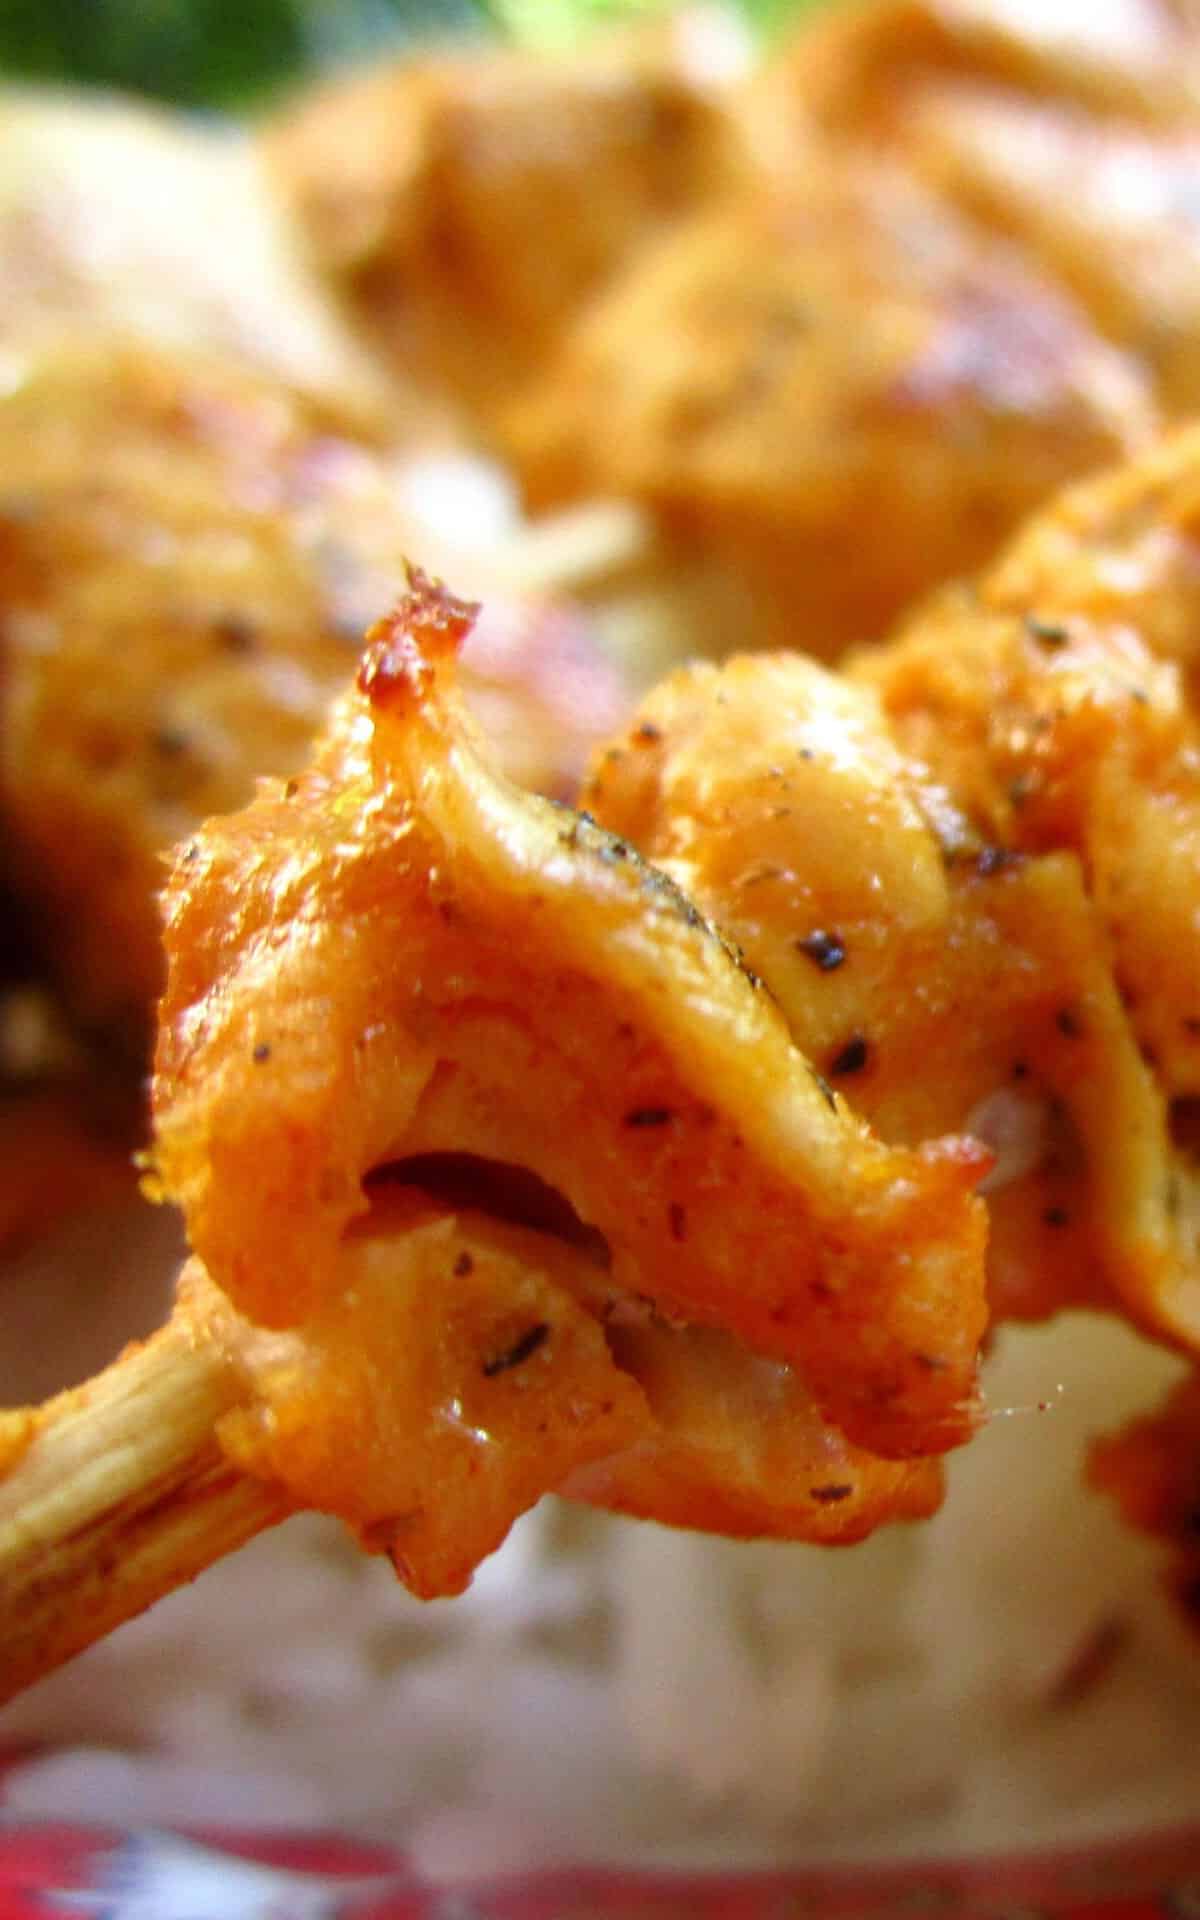  These skewers are a fun and creative way to serve chicken at your party